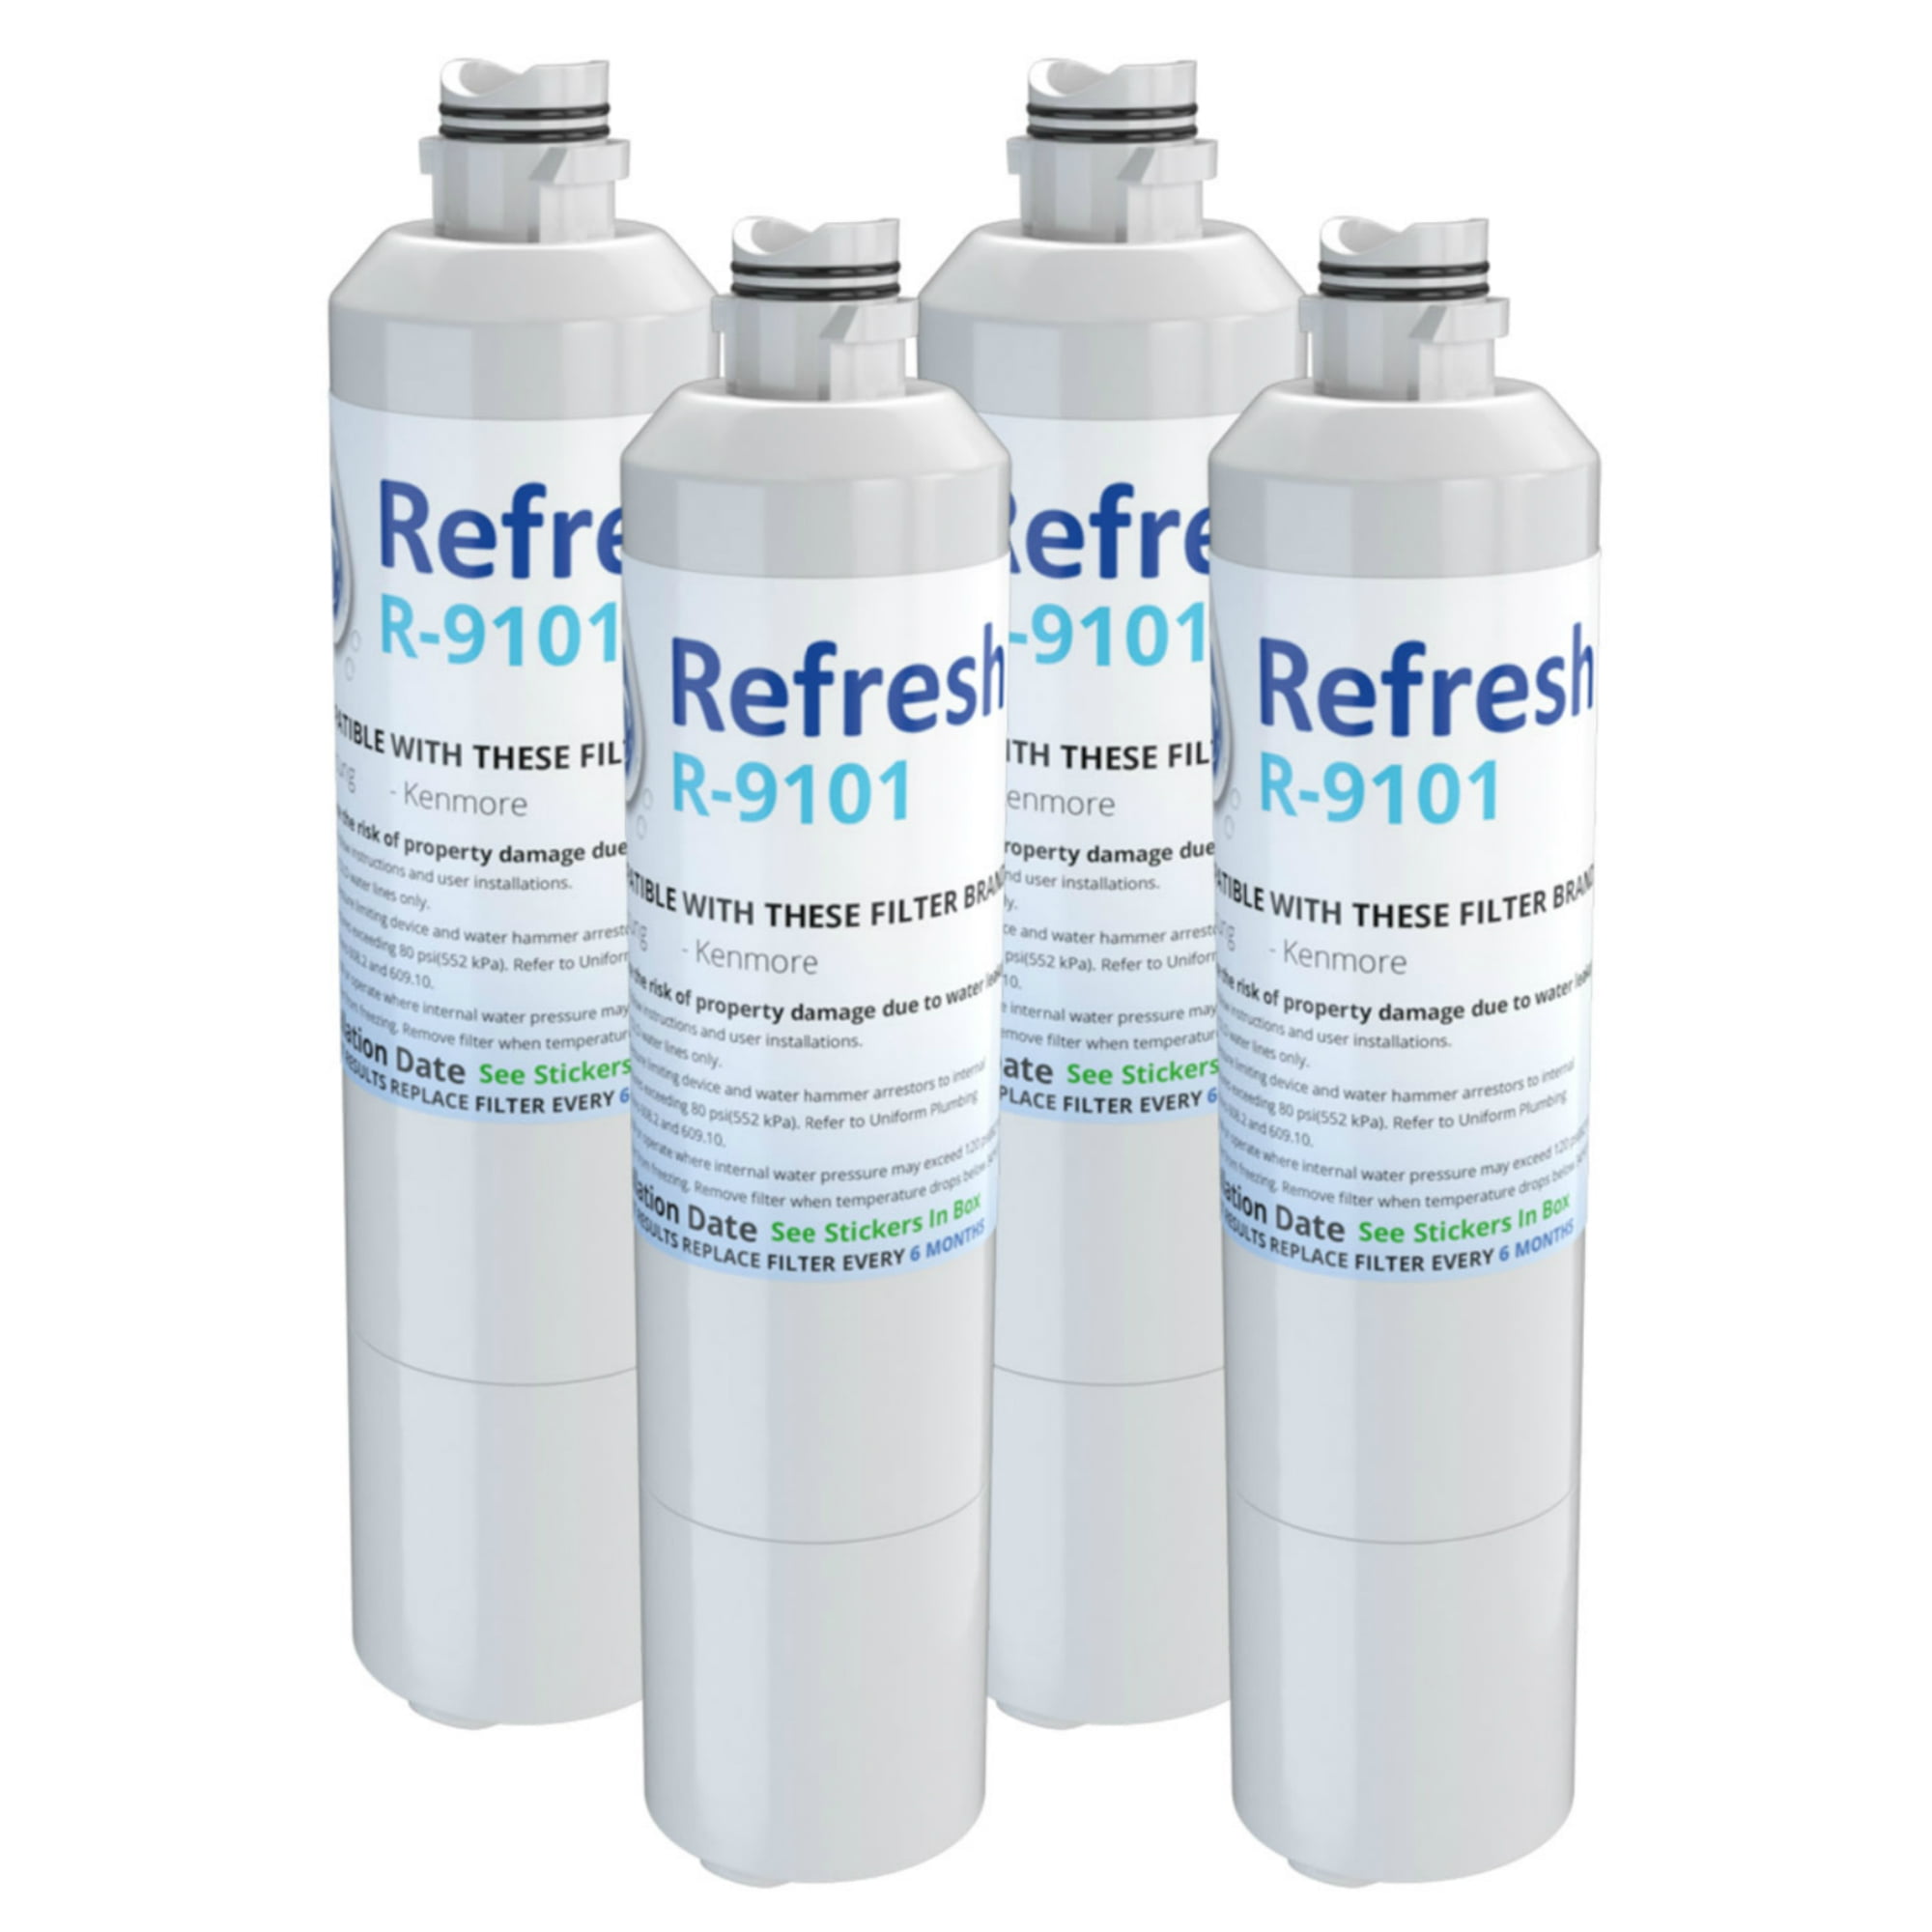 How To: Refrigerator Water Filter 